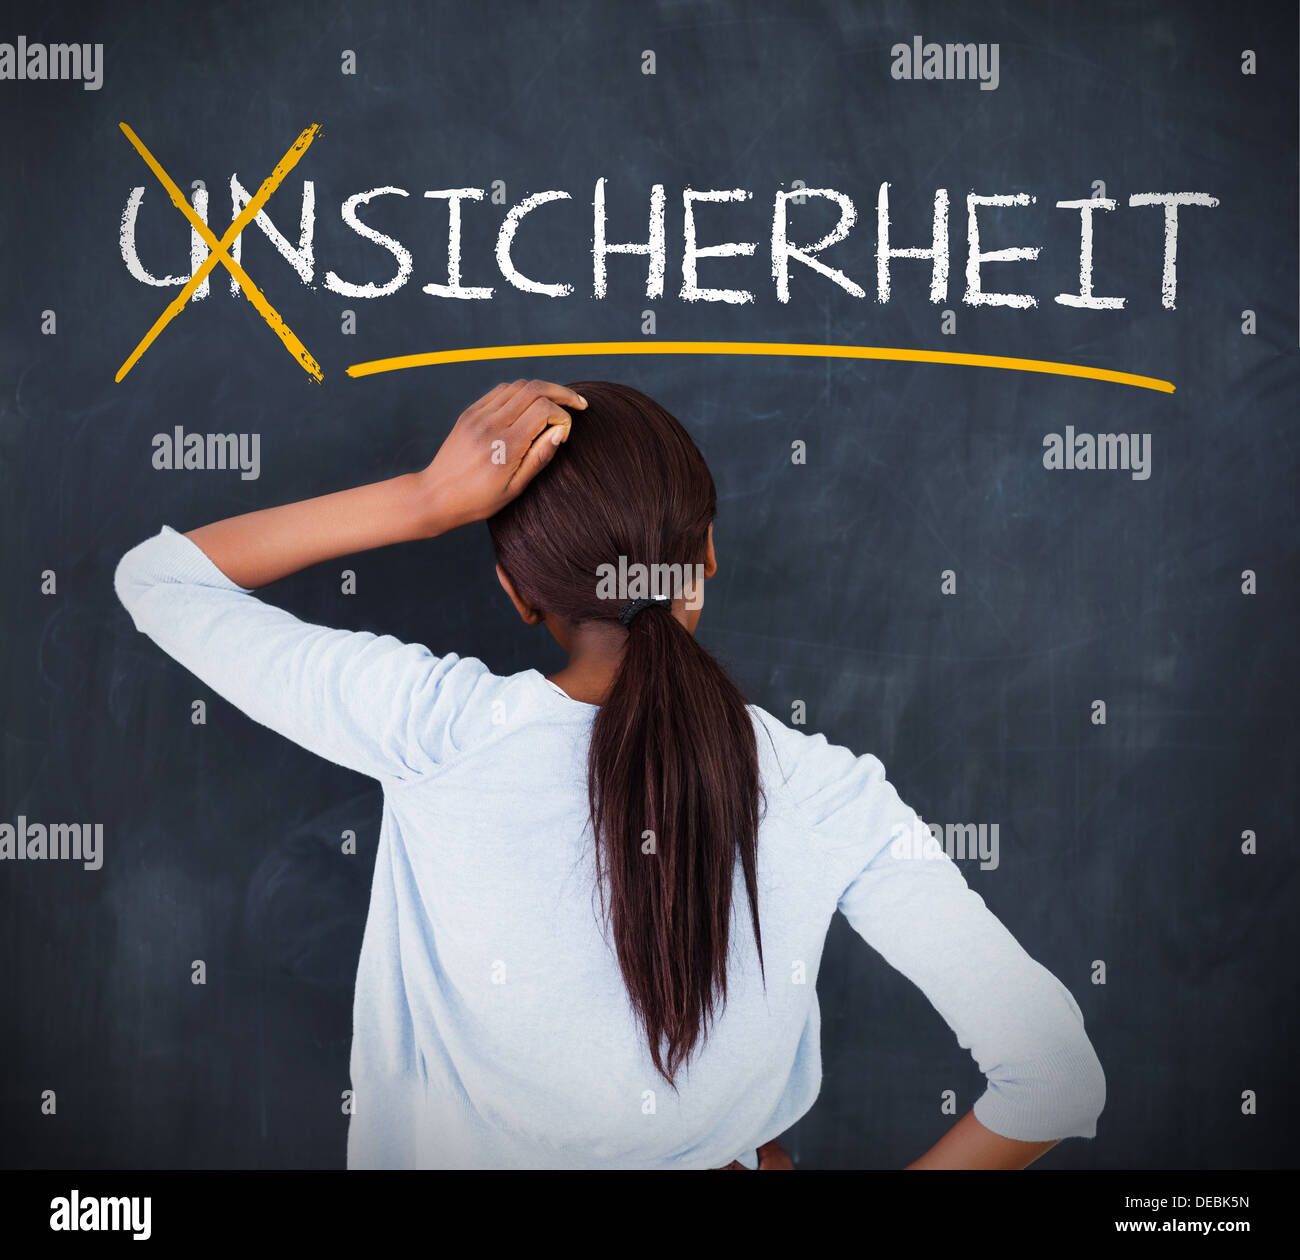 Woman looking at a chalkboard with sicherheit on it Stock Photo